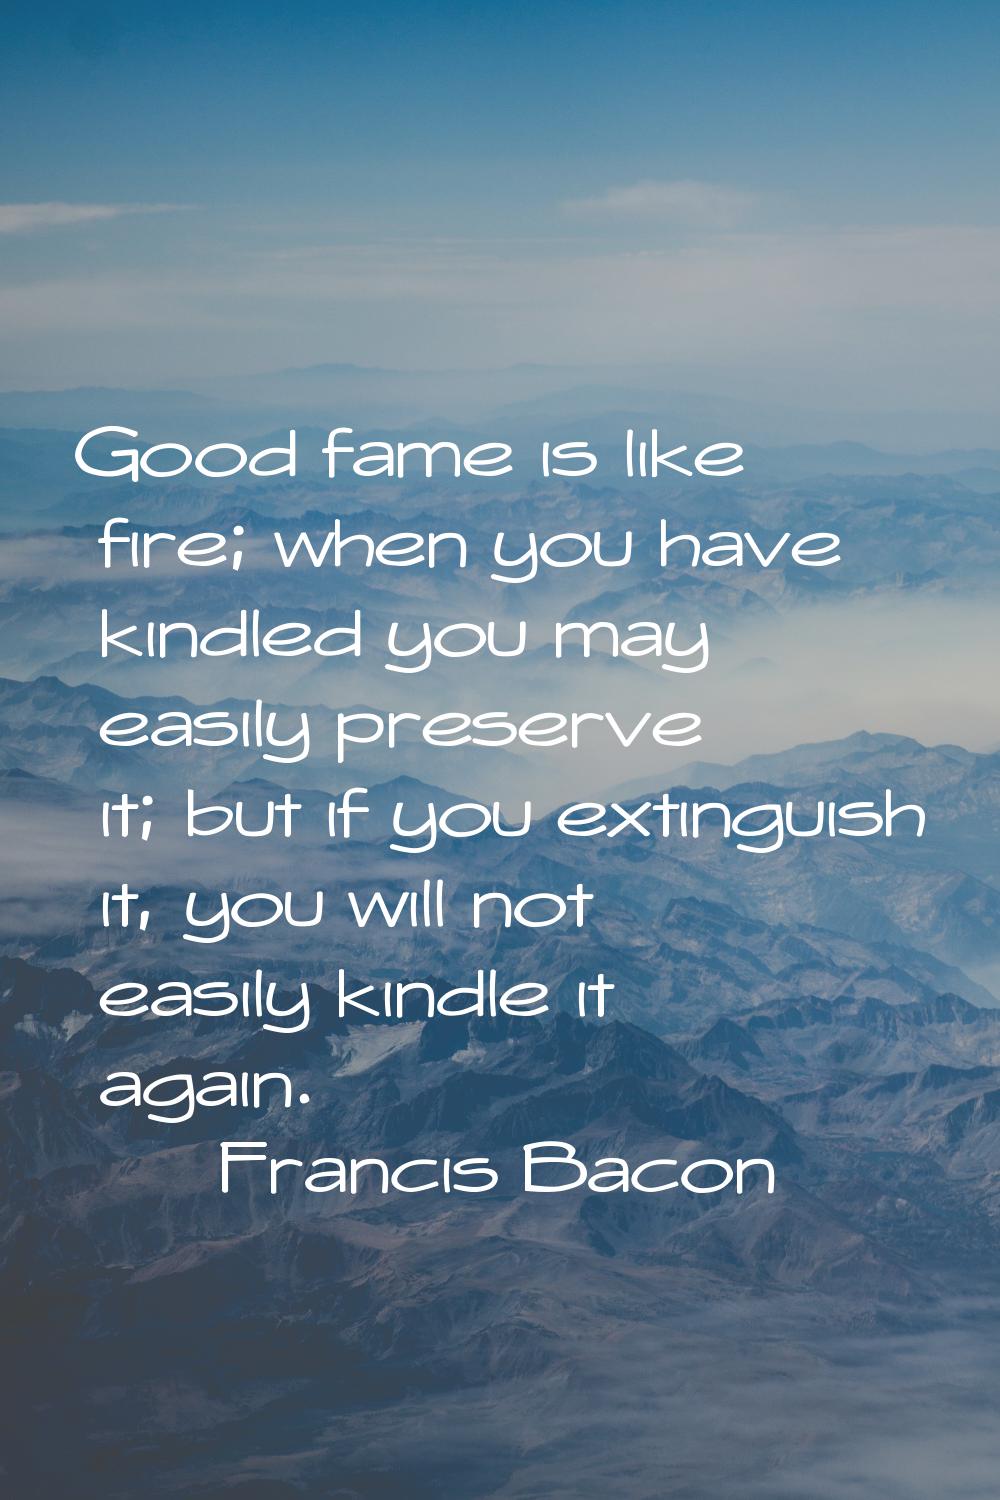 Good fame is like fire; when you have kindled you may easily preserve it; but if you extinguish it,